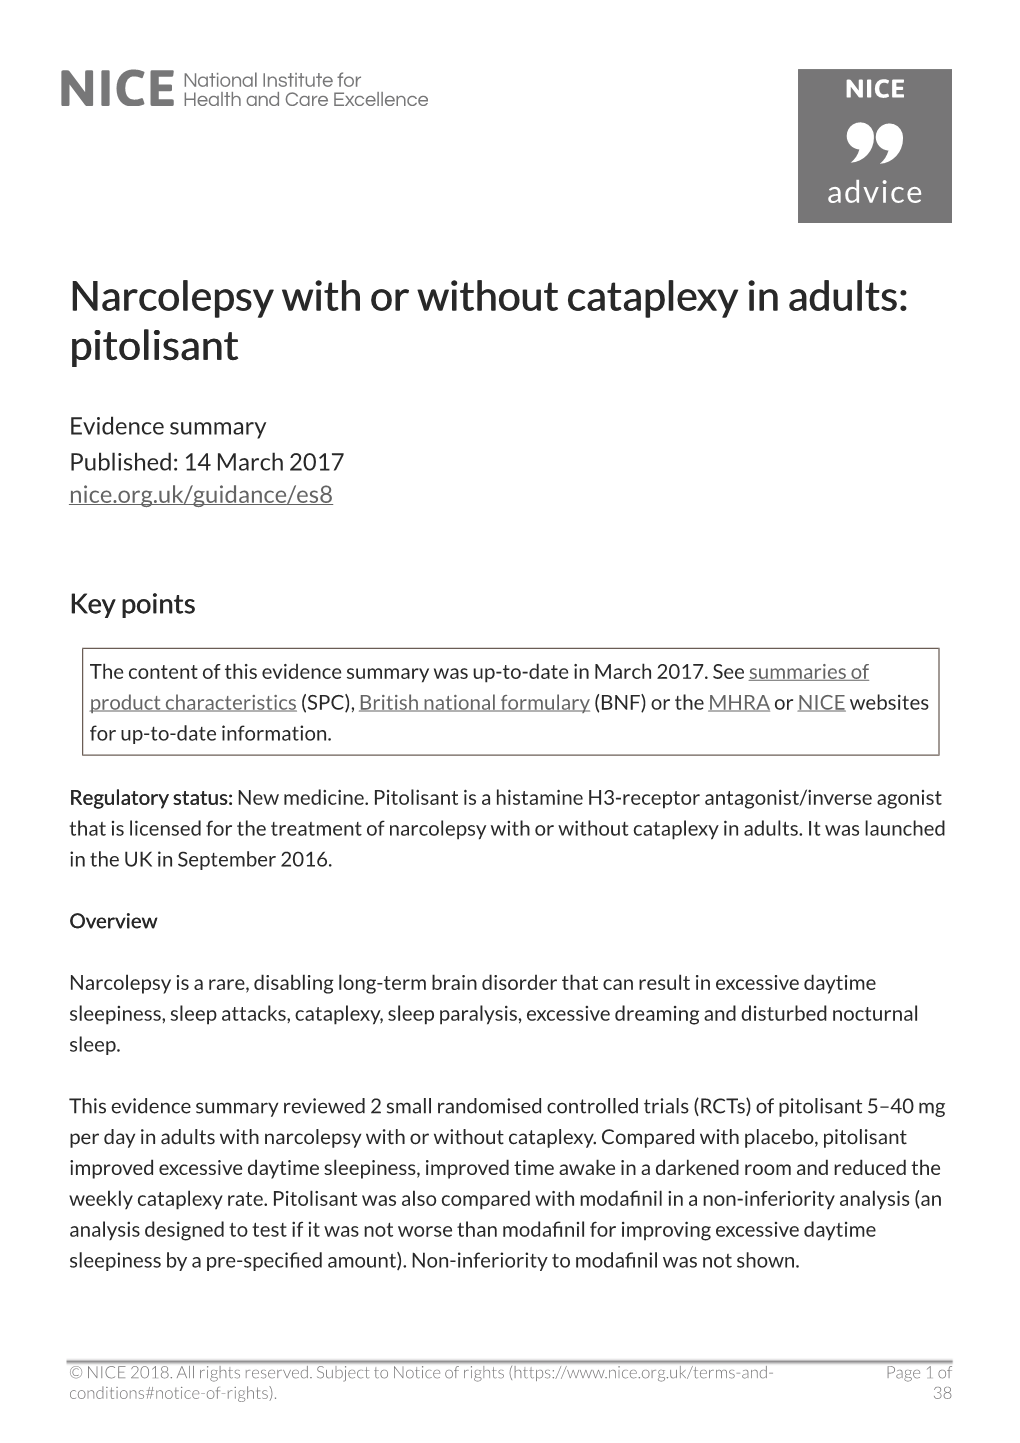 Narcolepsy with Or Without Cataplexy in Adults: Pitolisant (ES8)